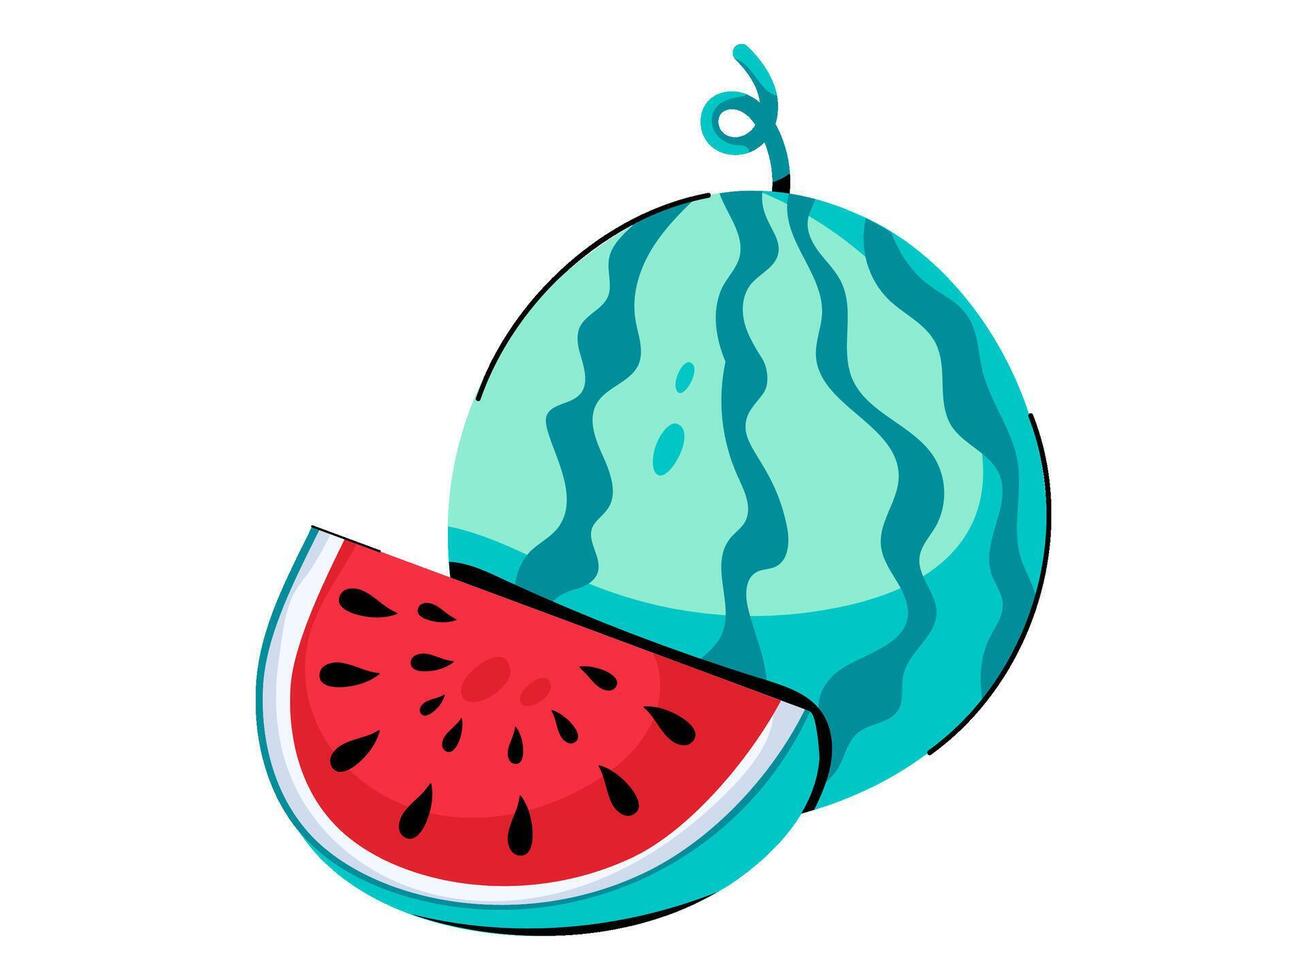 watermelon design with modern illustration concept style for badge farm agriculture sticker illustration vector